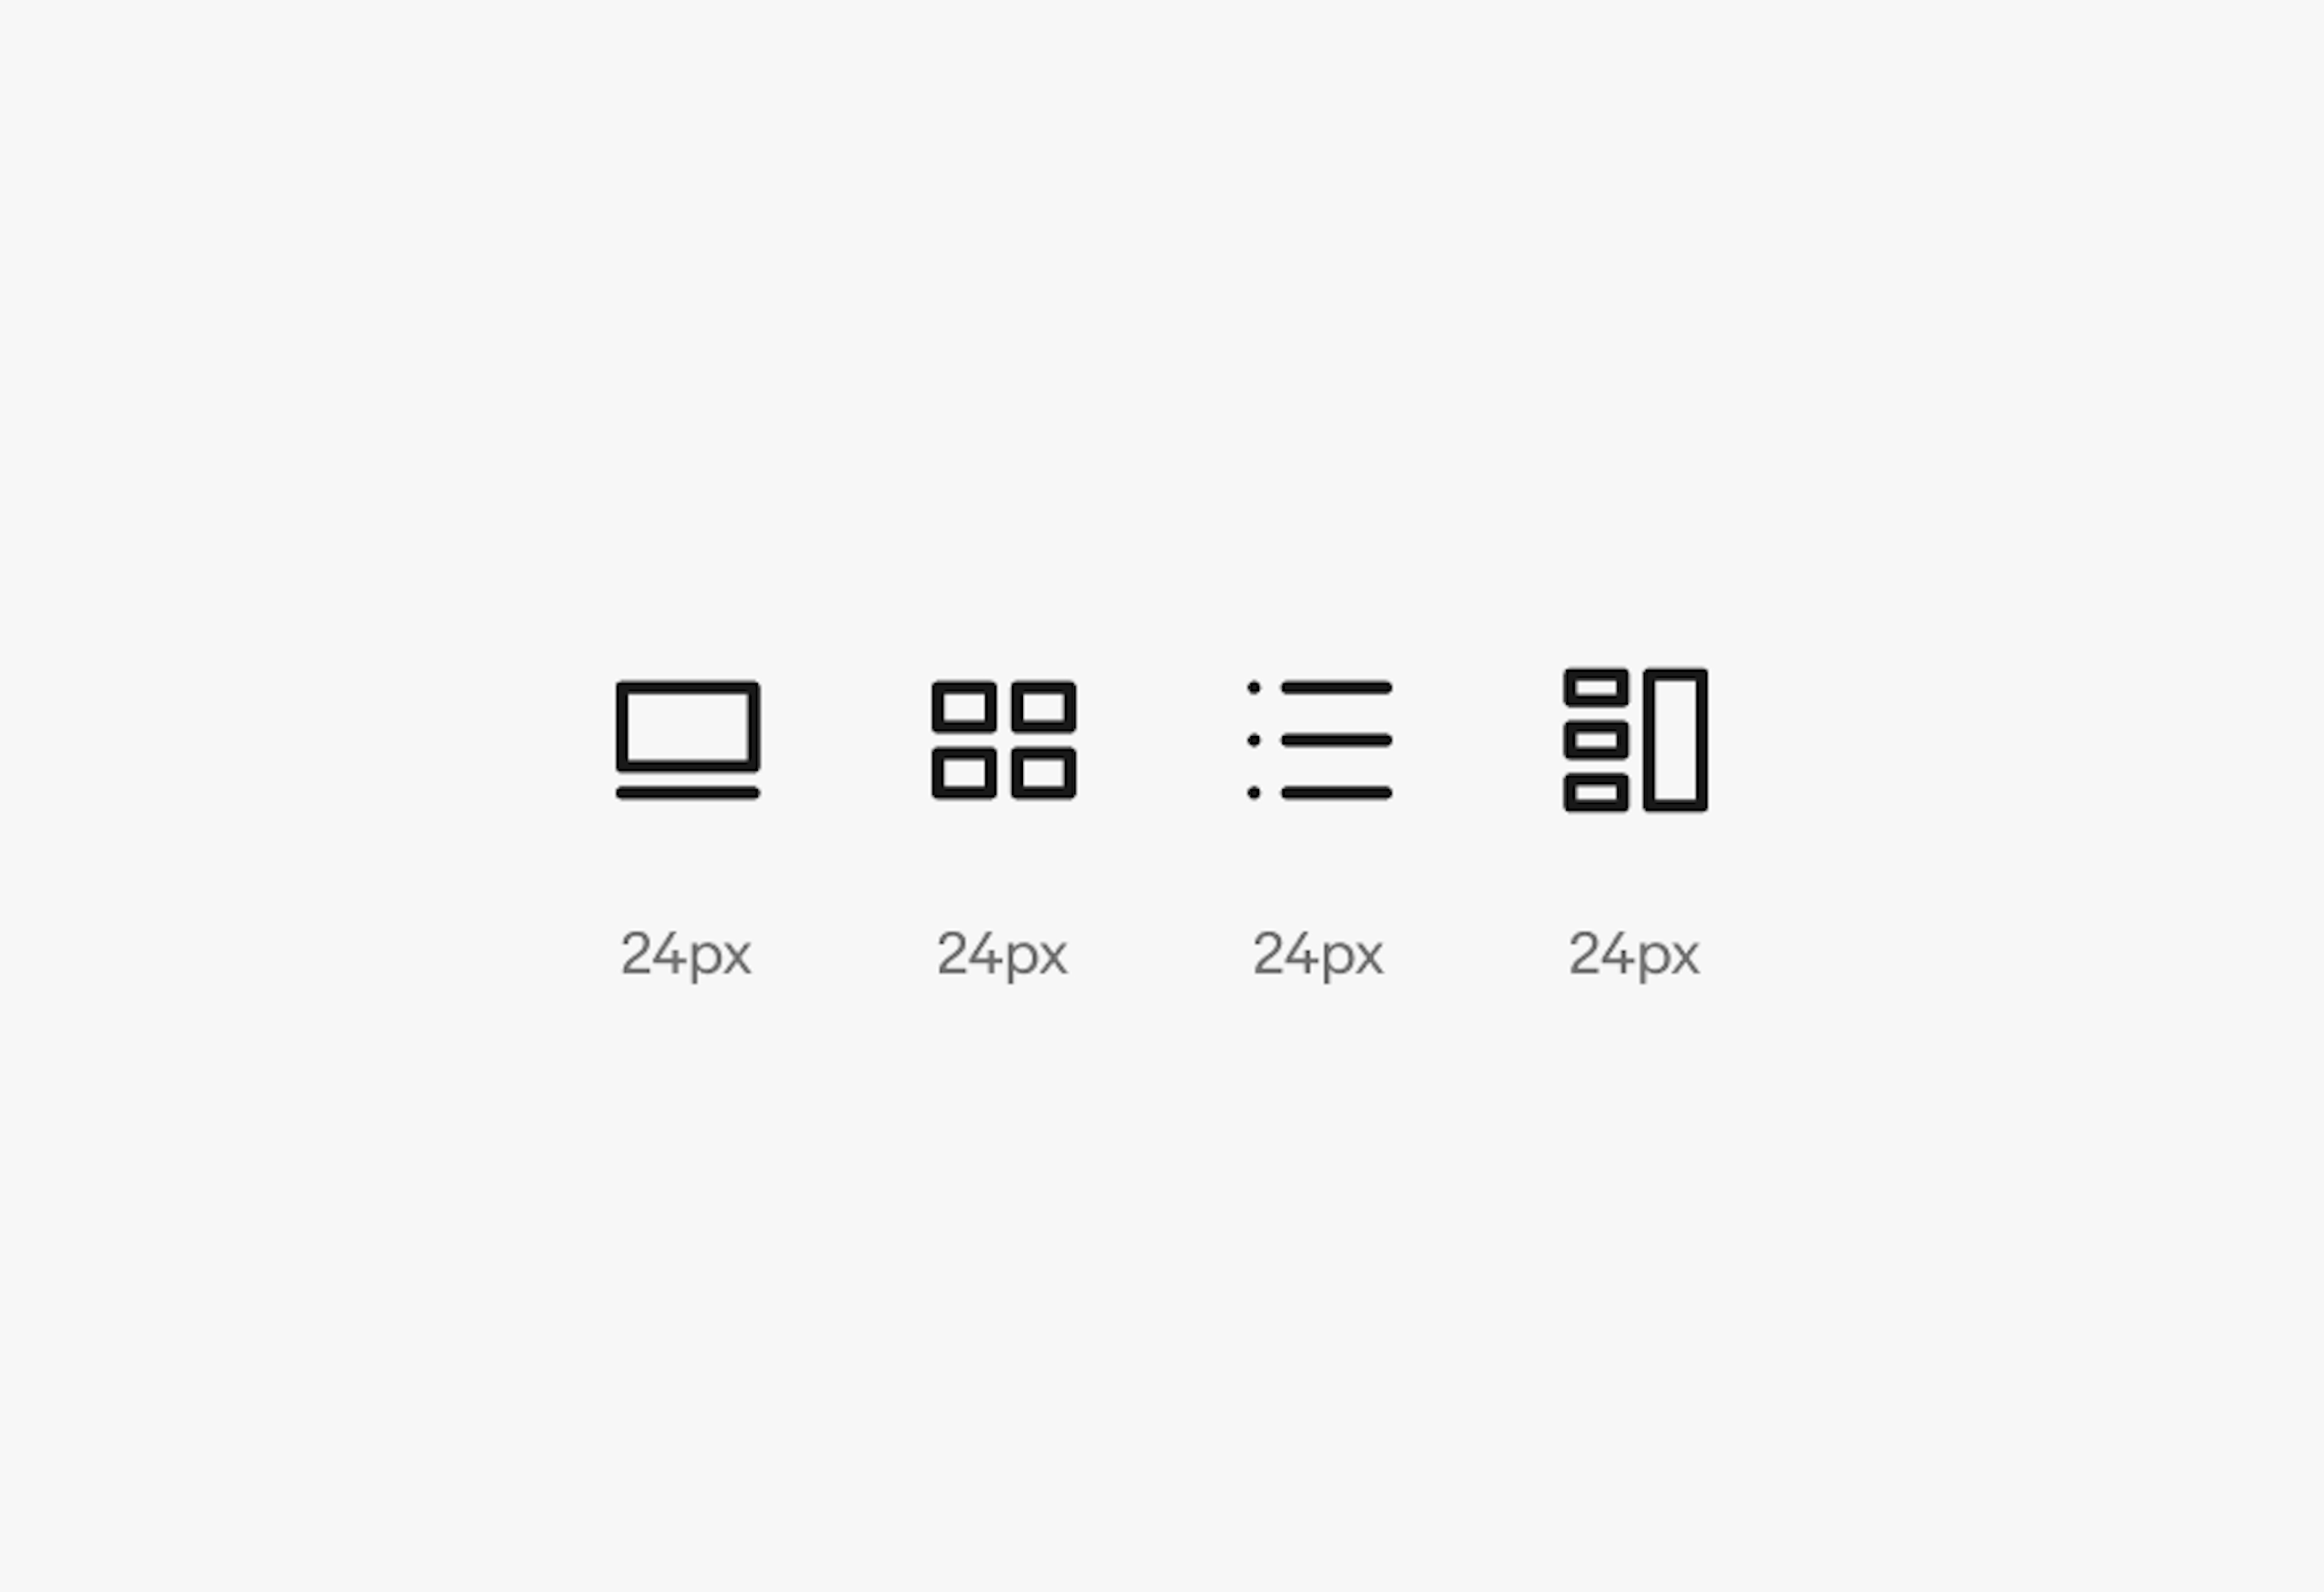 Four grid icons in a row. All are 24px in size.